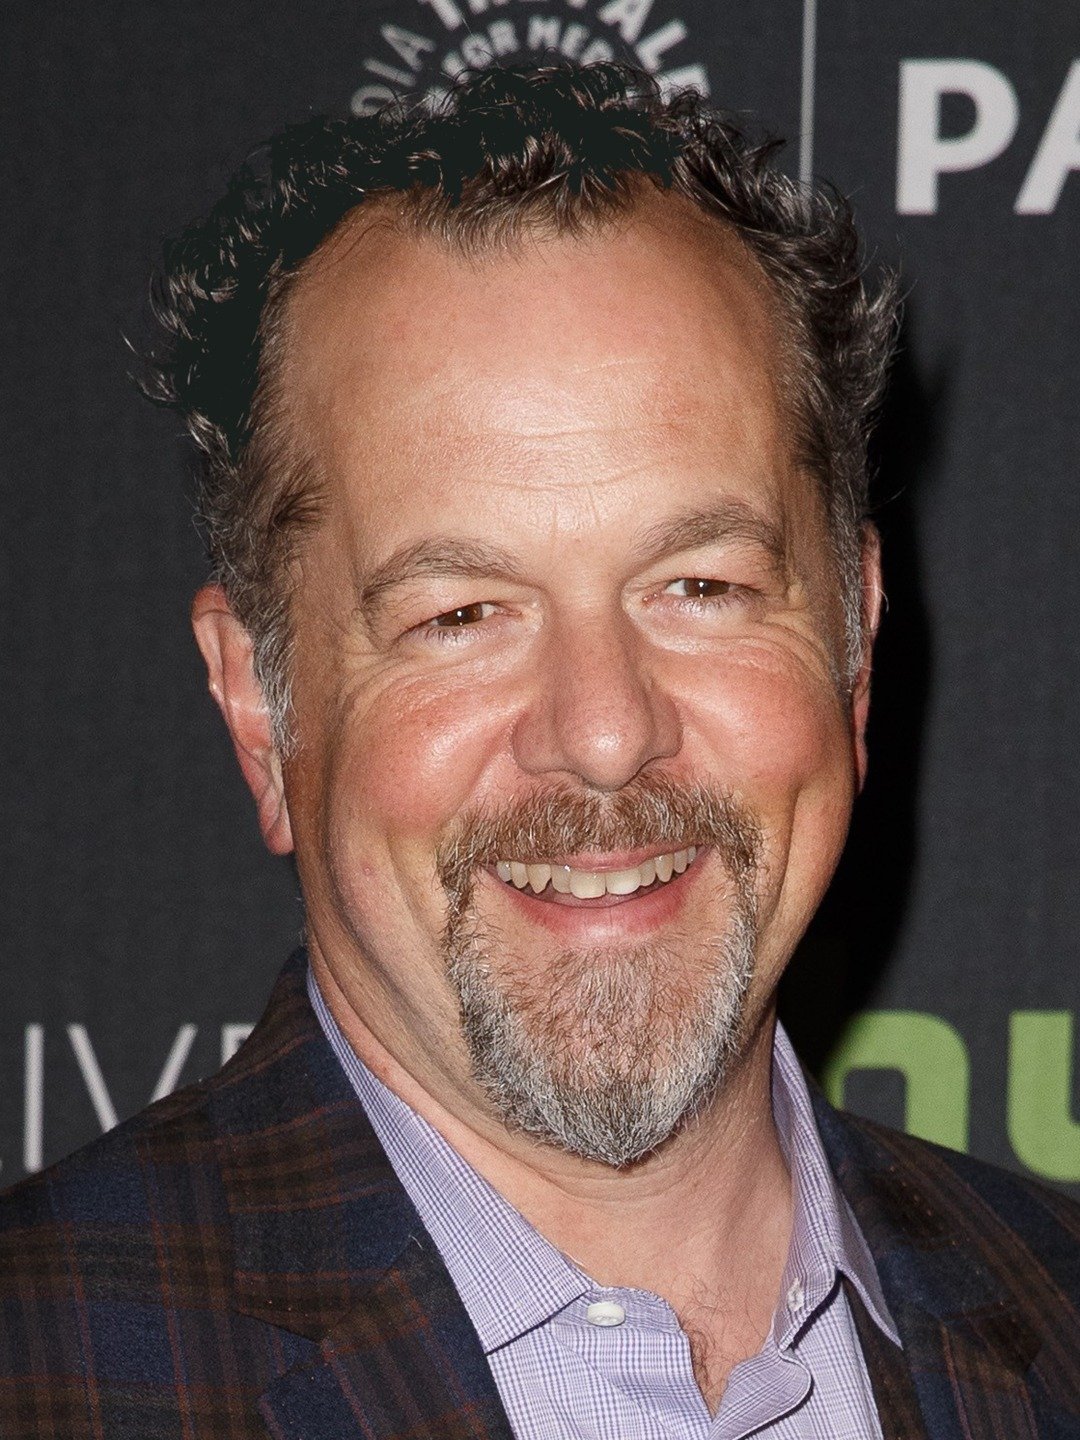 How tall is David Costabile?